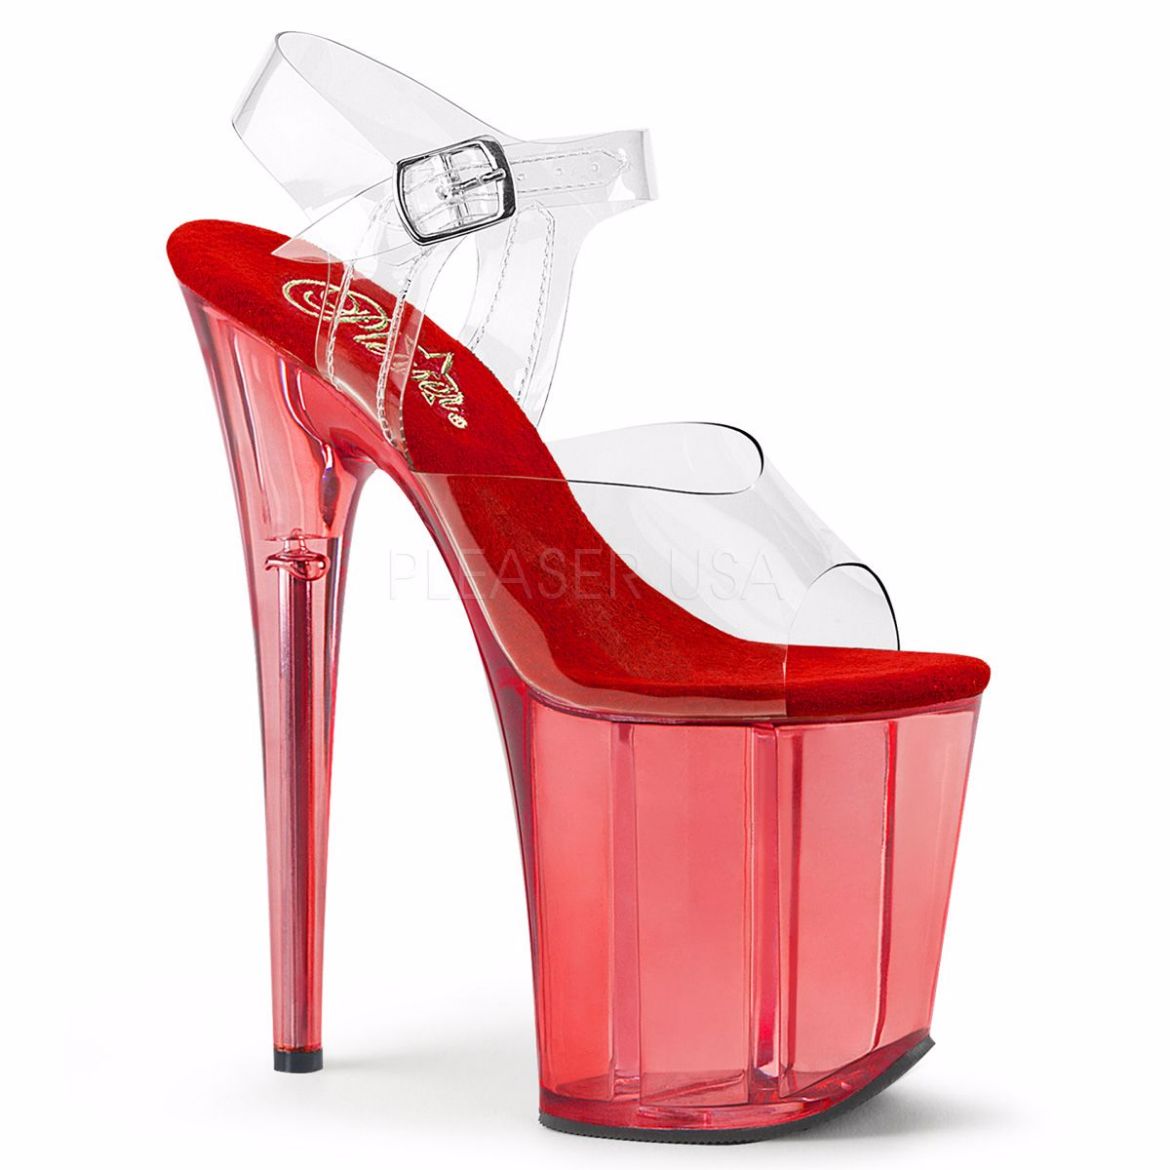 Product image of Pleaser Flamingo-808T Clear/Red Tinted, 8 inch (20.3 cm) Heel, 4 inch (10.2 cm) Platform Sandal Shoes